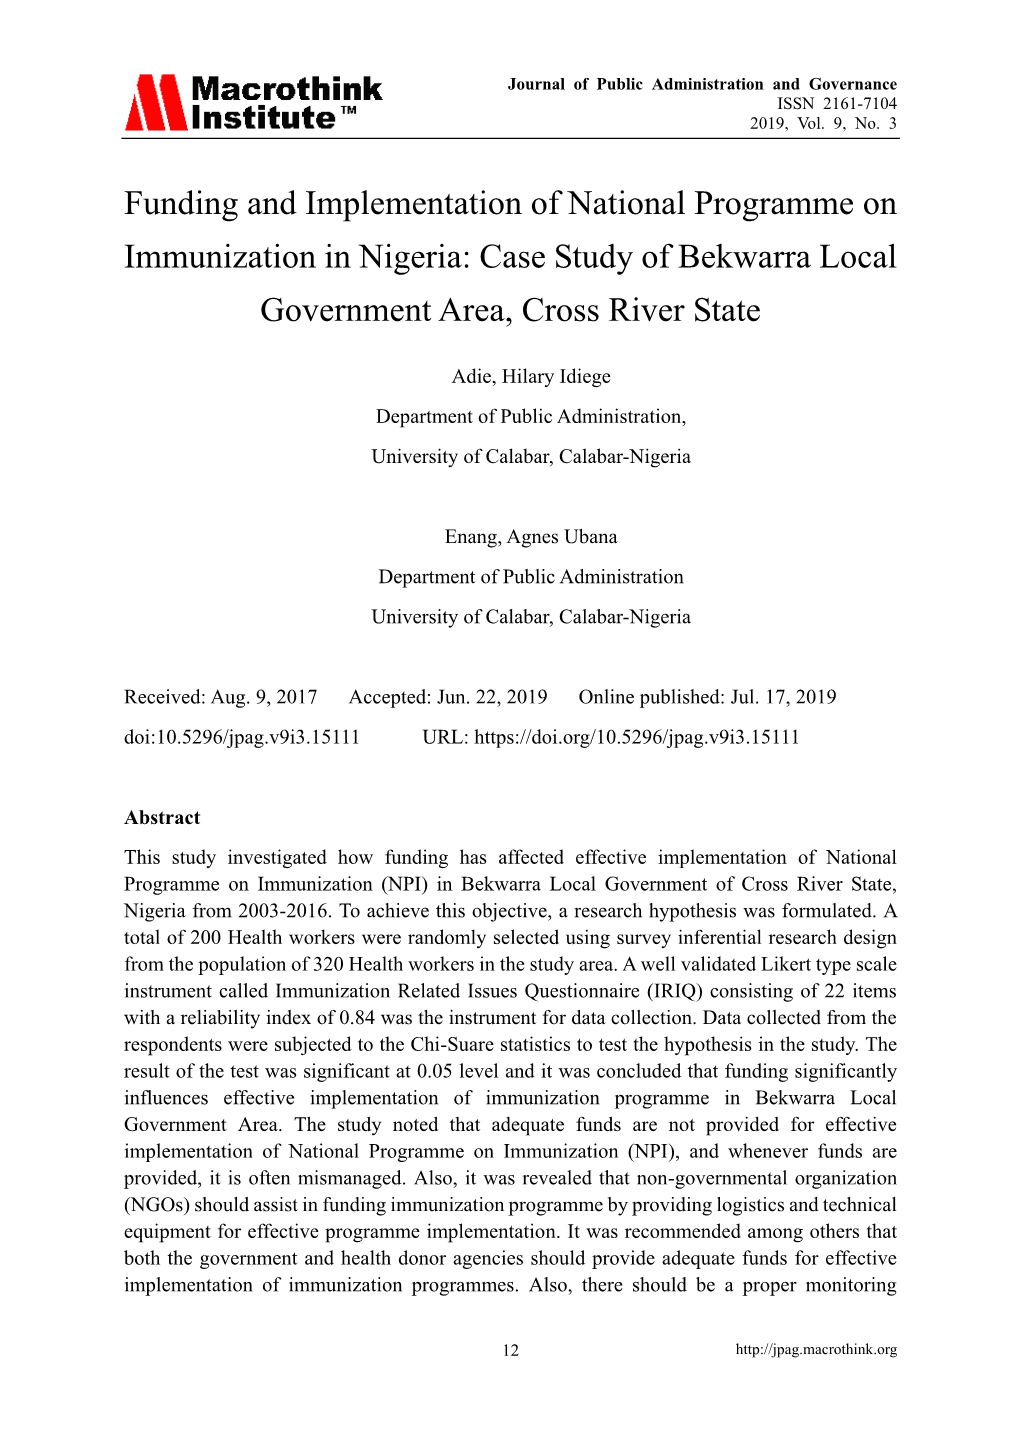 Case Study of Bekwarra Local Government Area, Cross River State